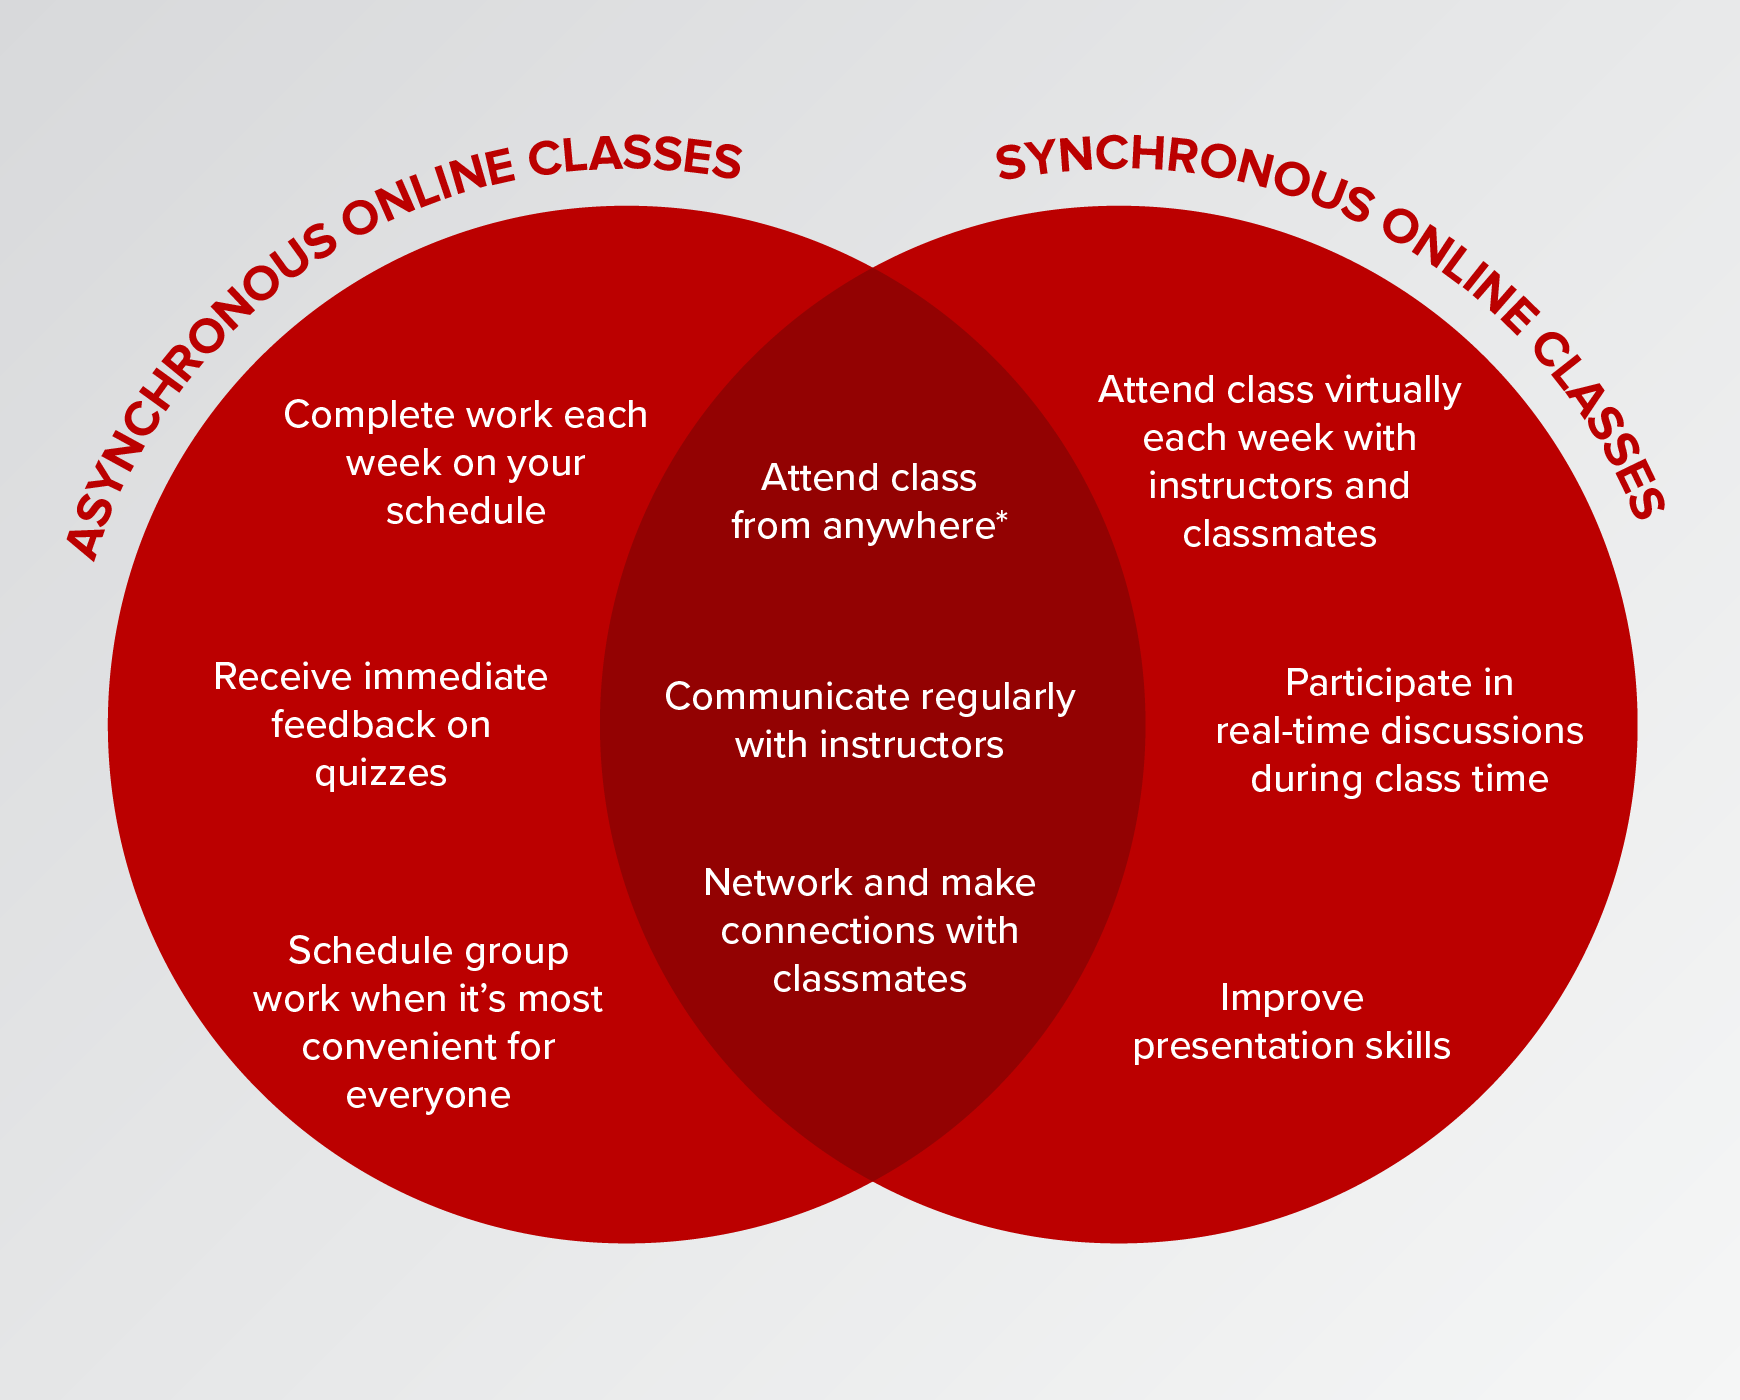 Venn Diagram showing the differences between asynchronous and synchronous learning.